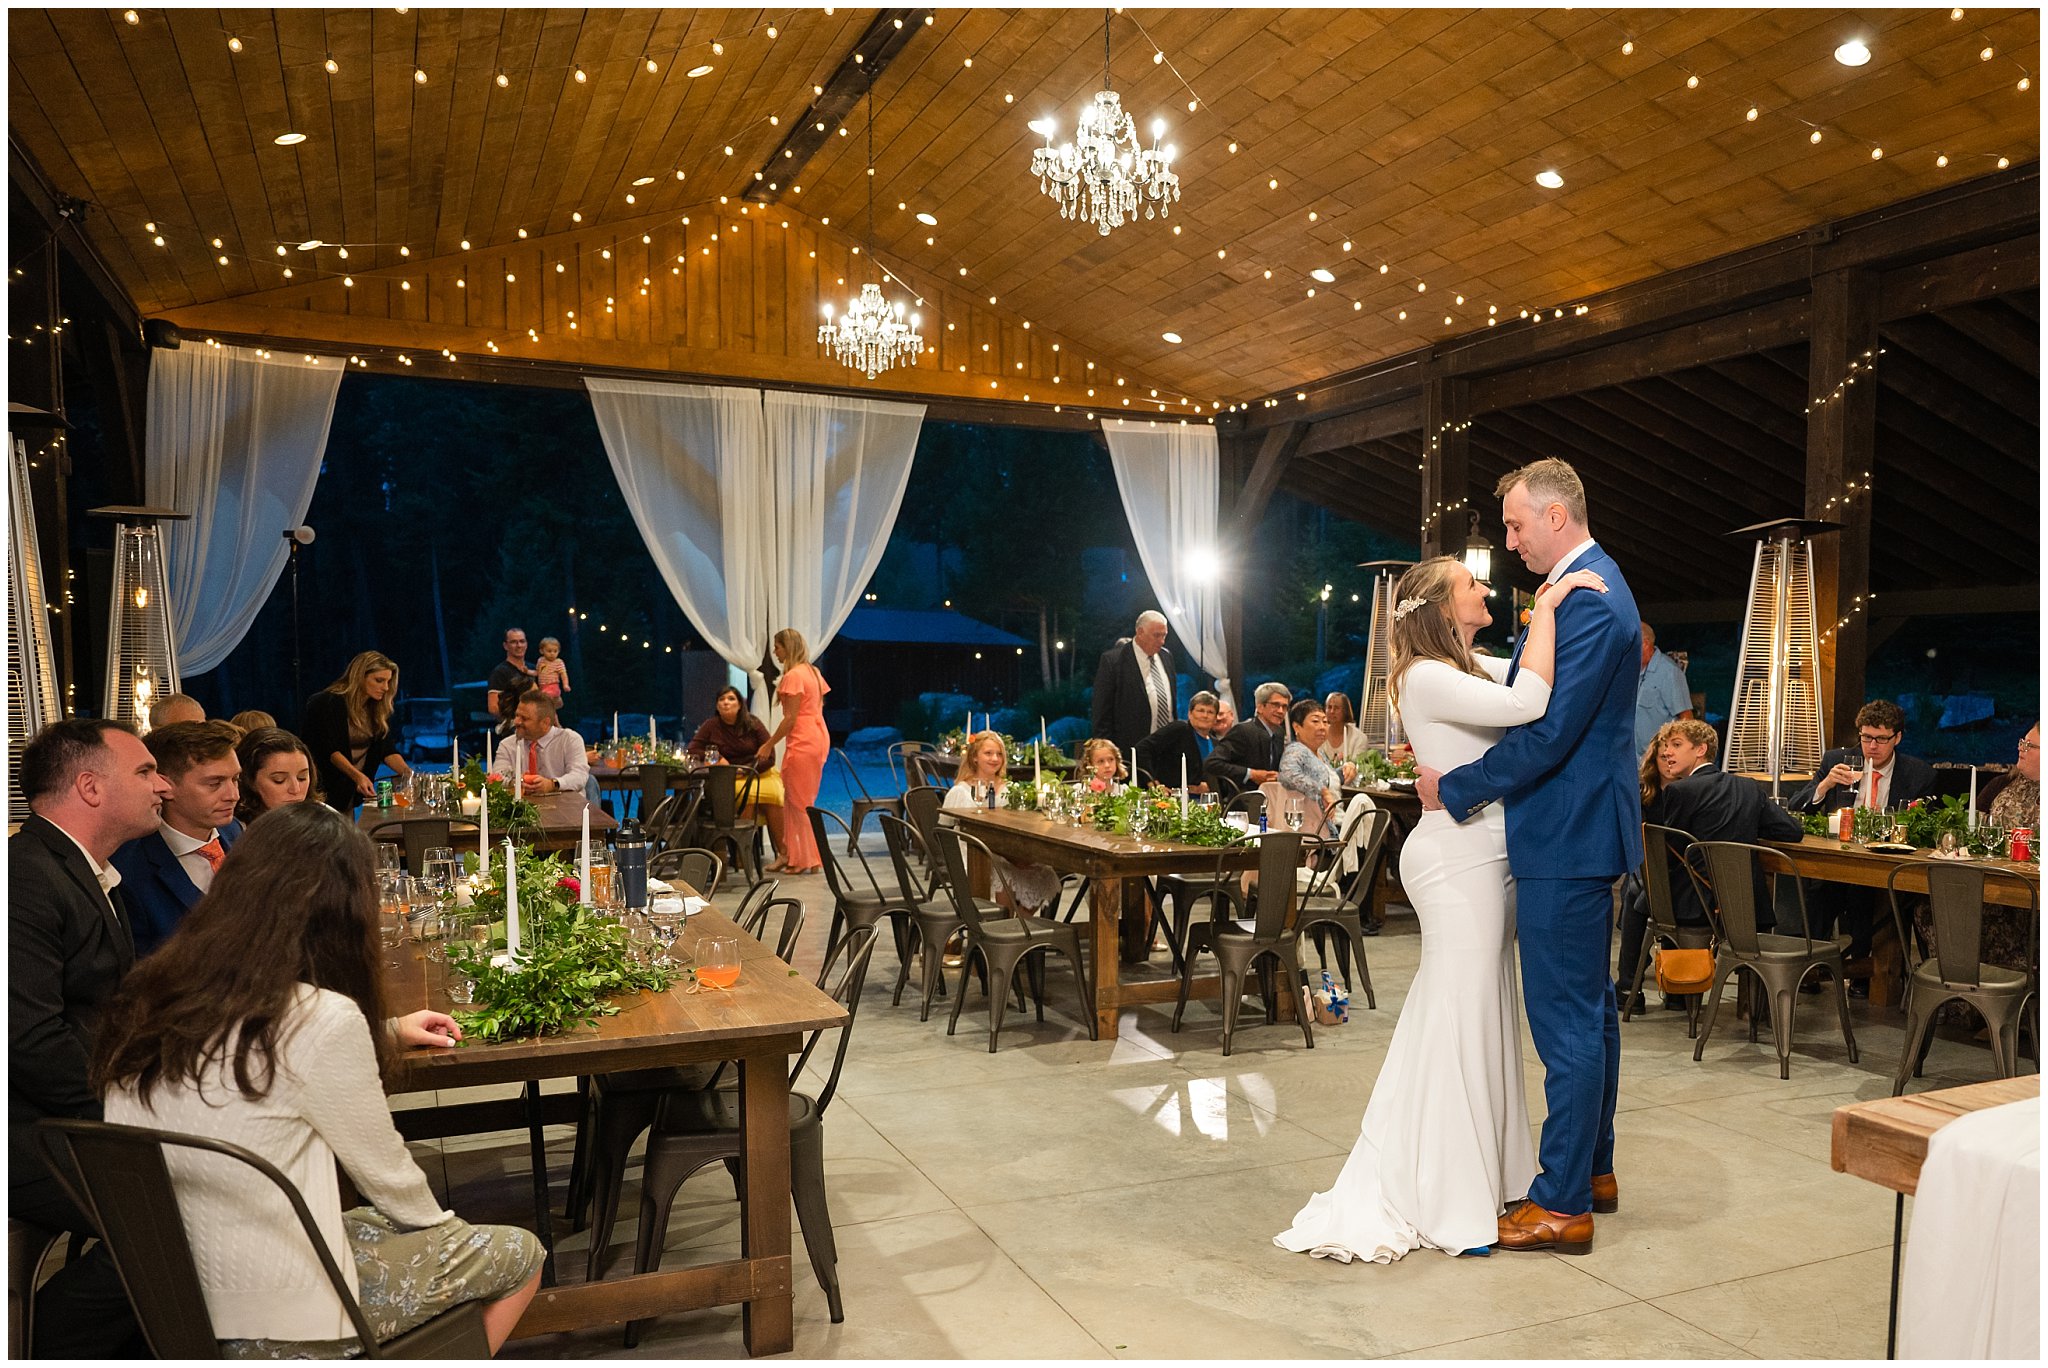 Dancing and reception under pavilion in the forest with draping lights and chandeliers | Mountainside Weddings Kalispell Montana Destination Wedding | Jessie and Dallin Photography